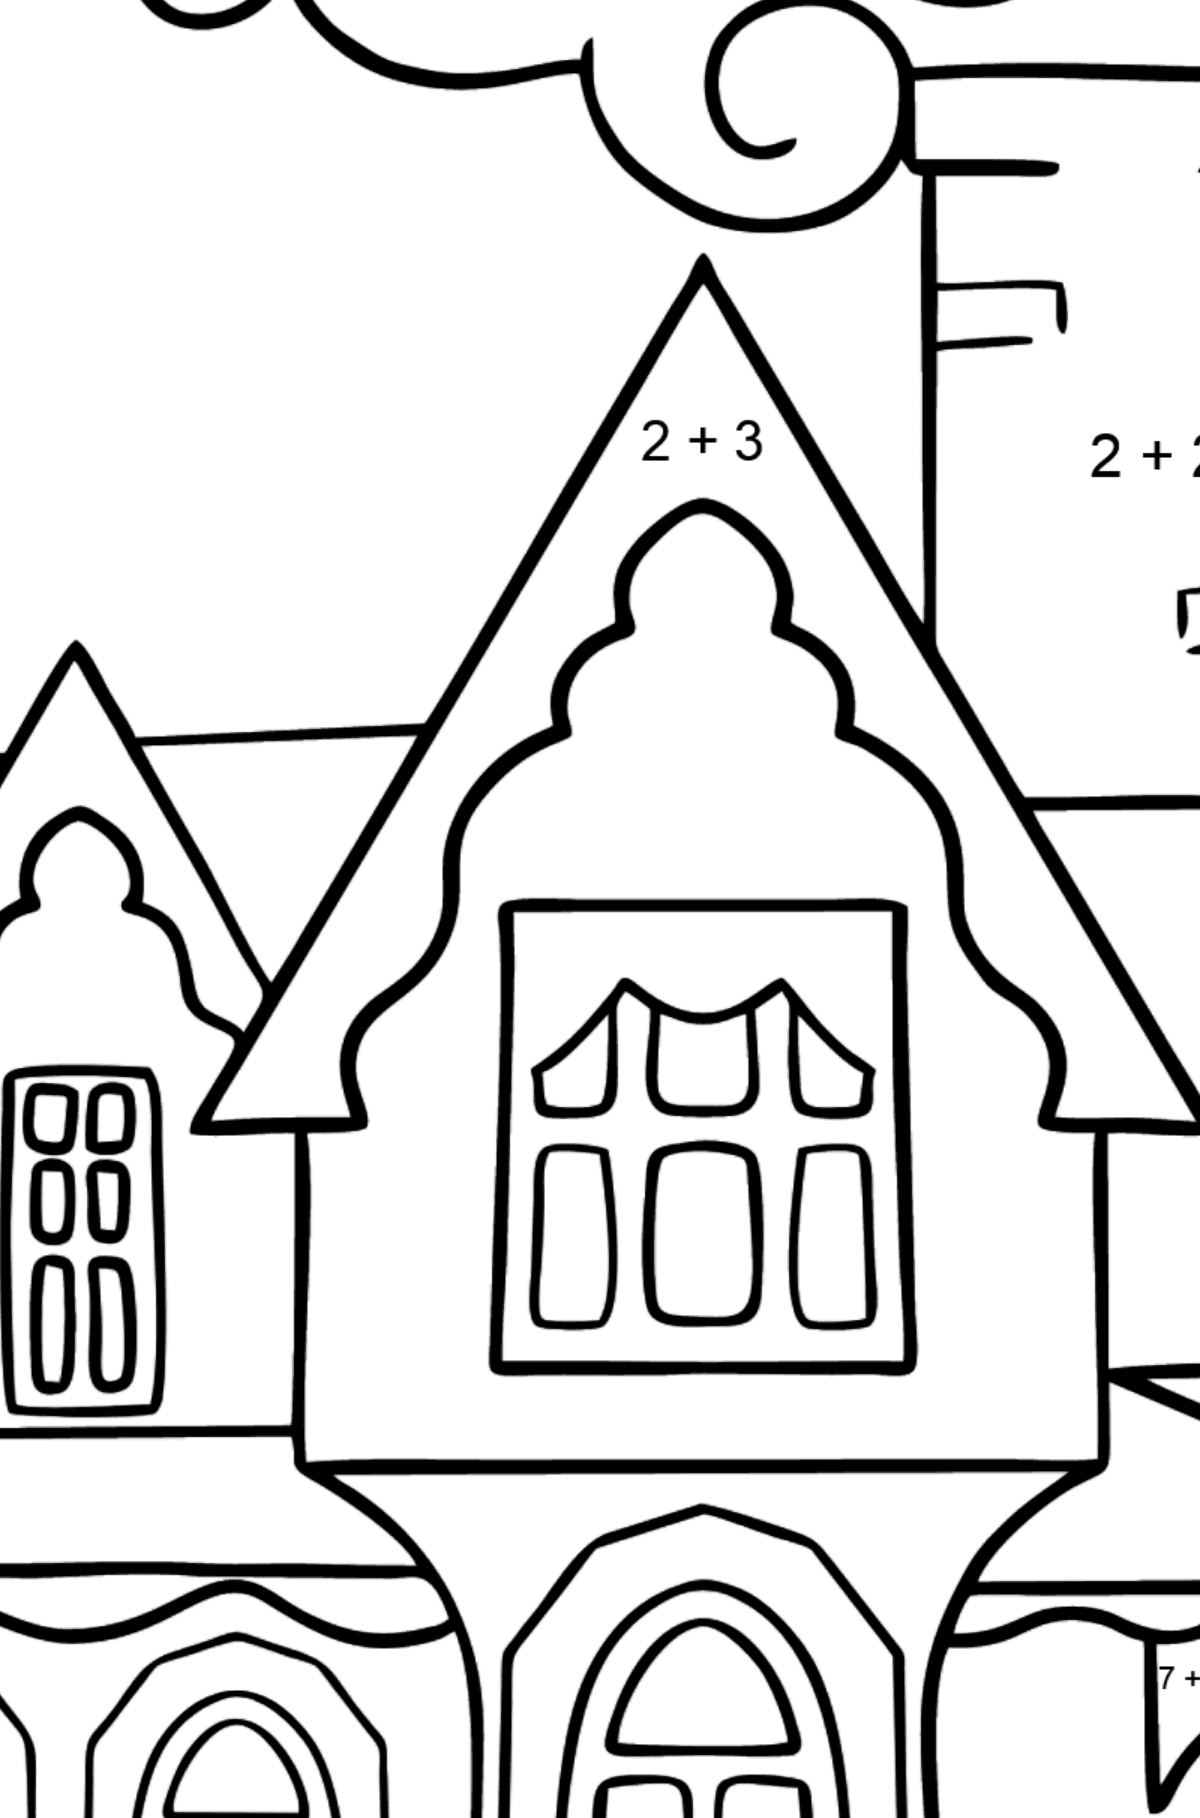 Simple Coloring Page - A Miraculous House - Math Coloring - Addition for Kids